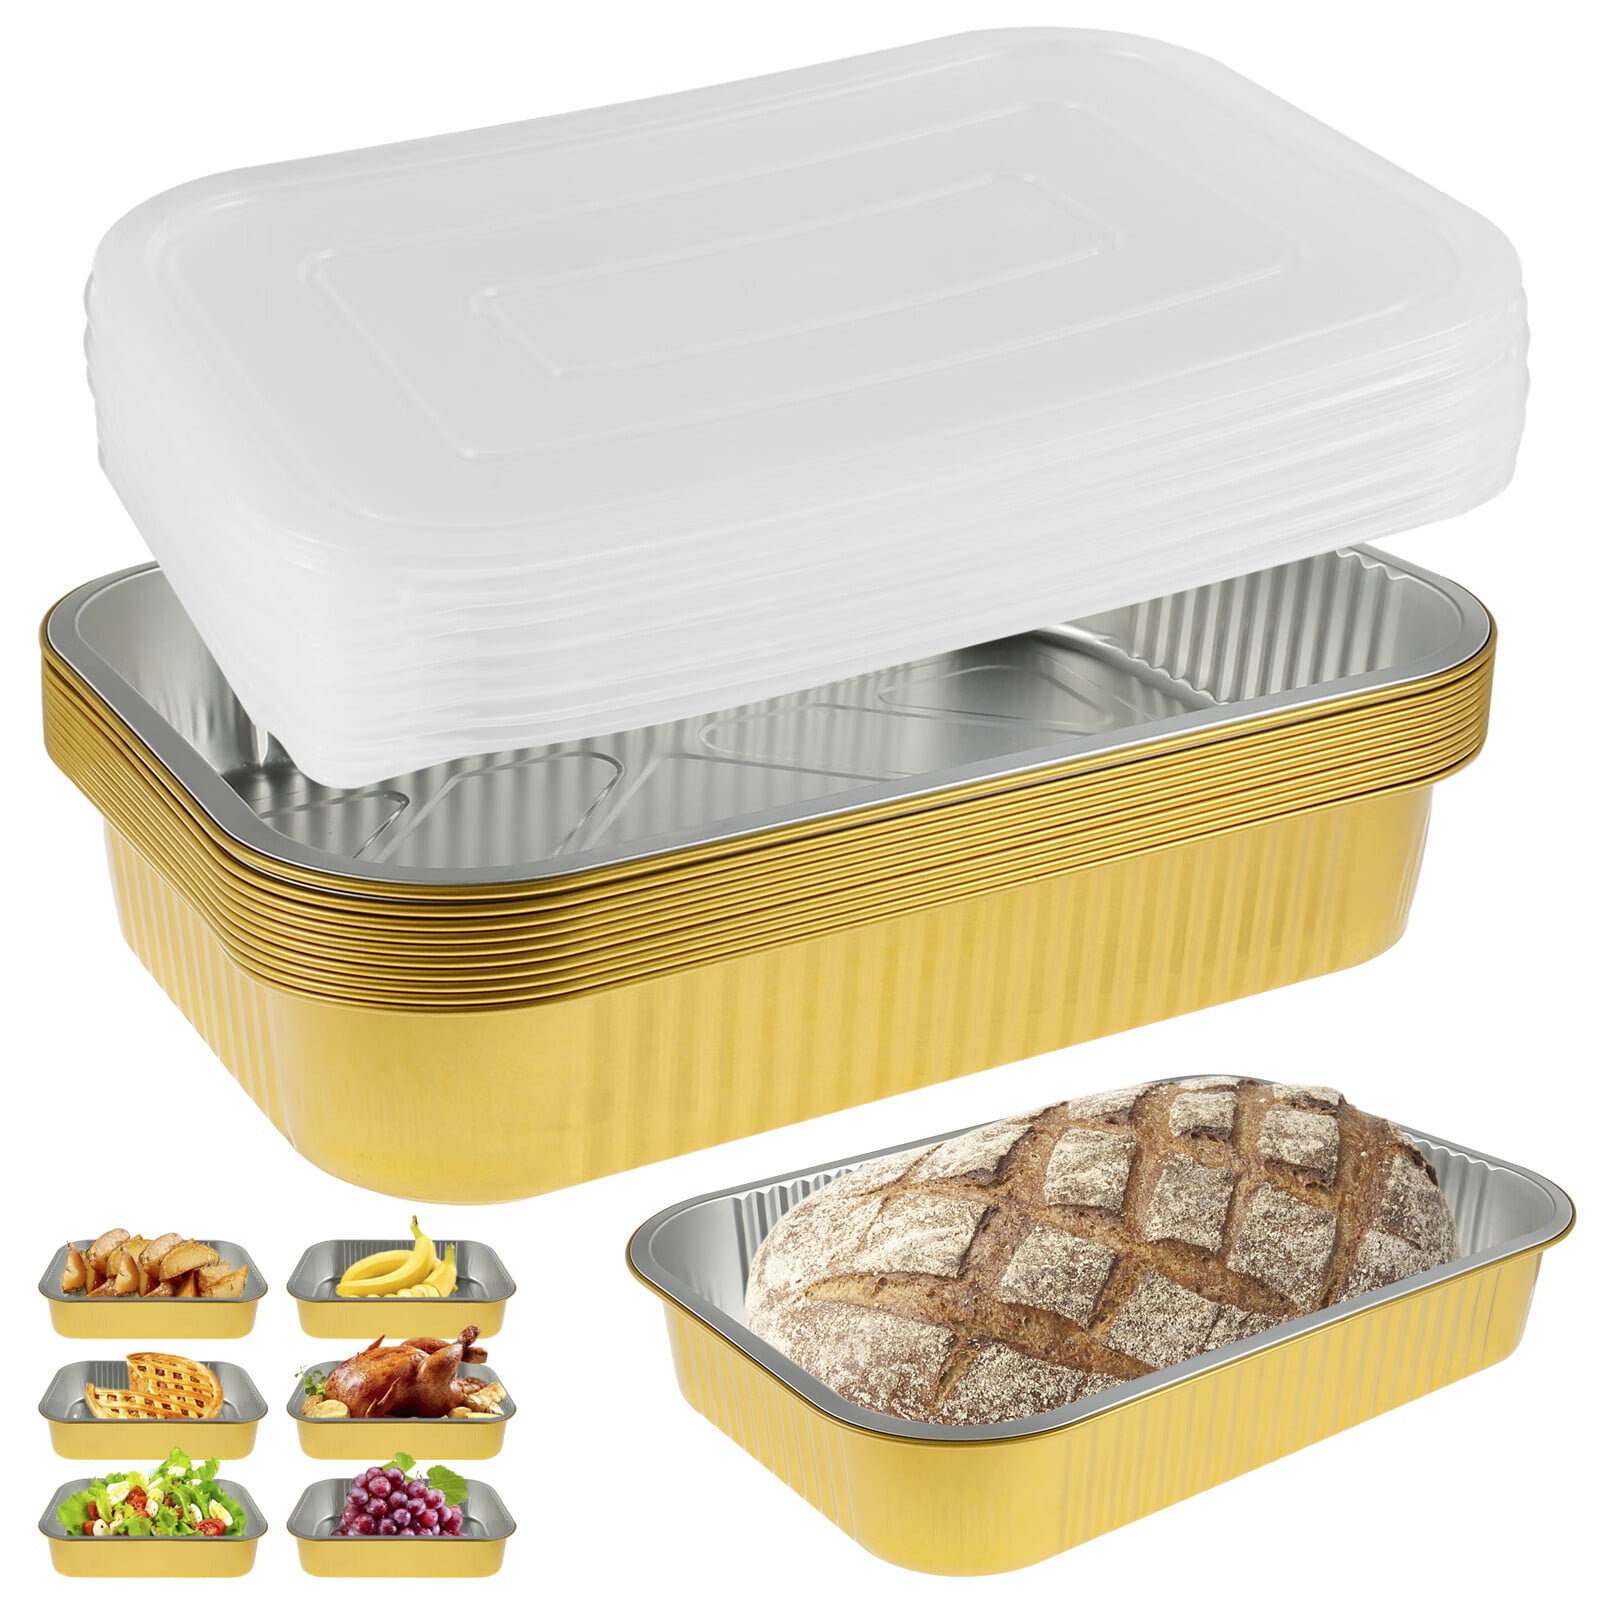  Lot45 Aluminum Catering Pan 3 Sections, 10pk - Disposable Aluminum  Tray Foil Pans, Oven Pans Take Out Pans for Catering: Home & Kitchen